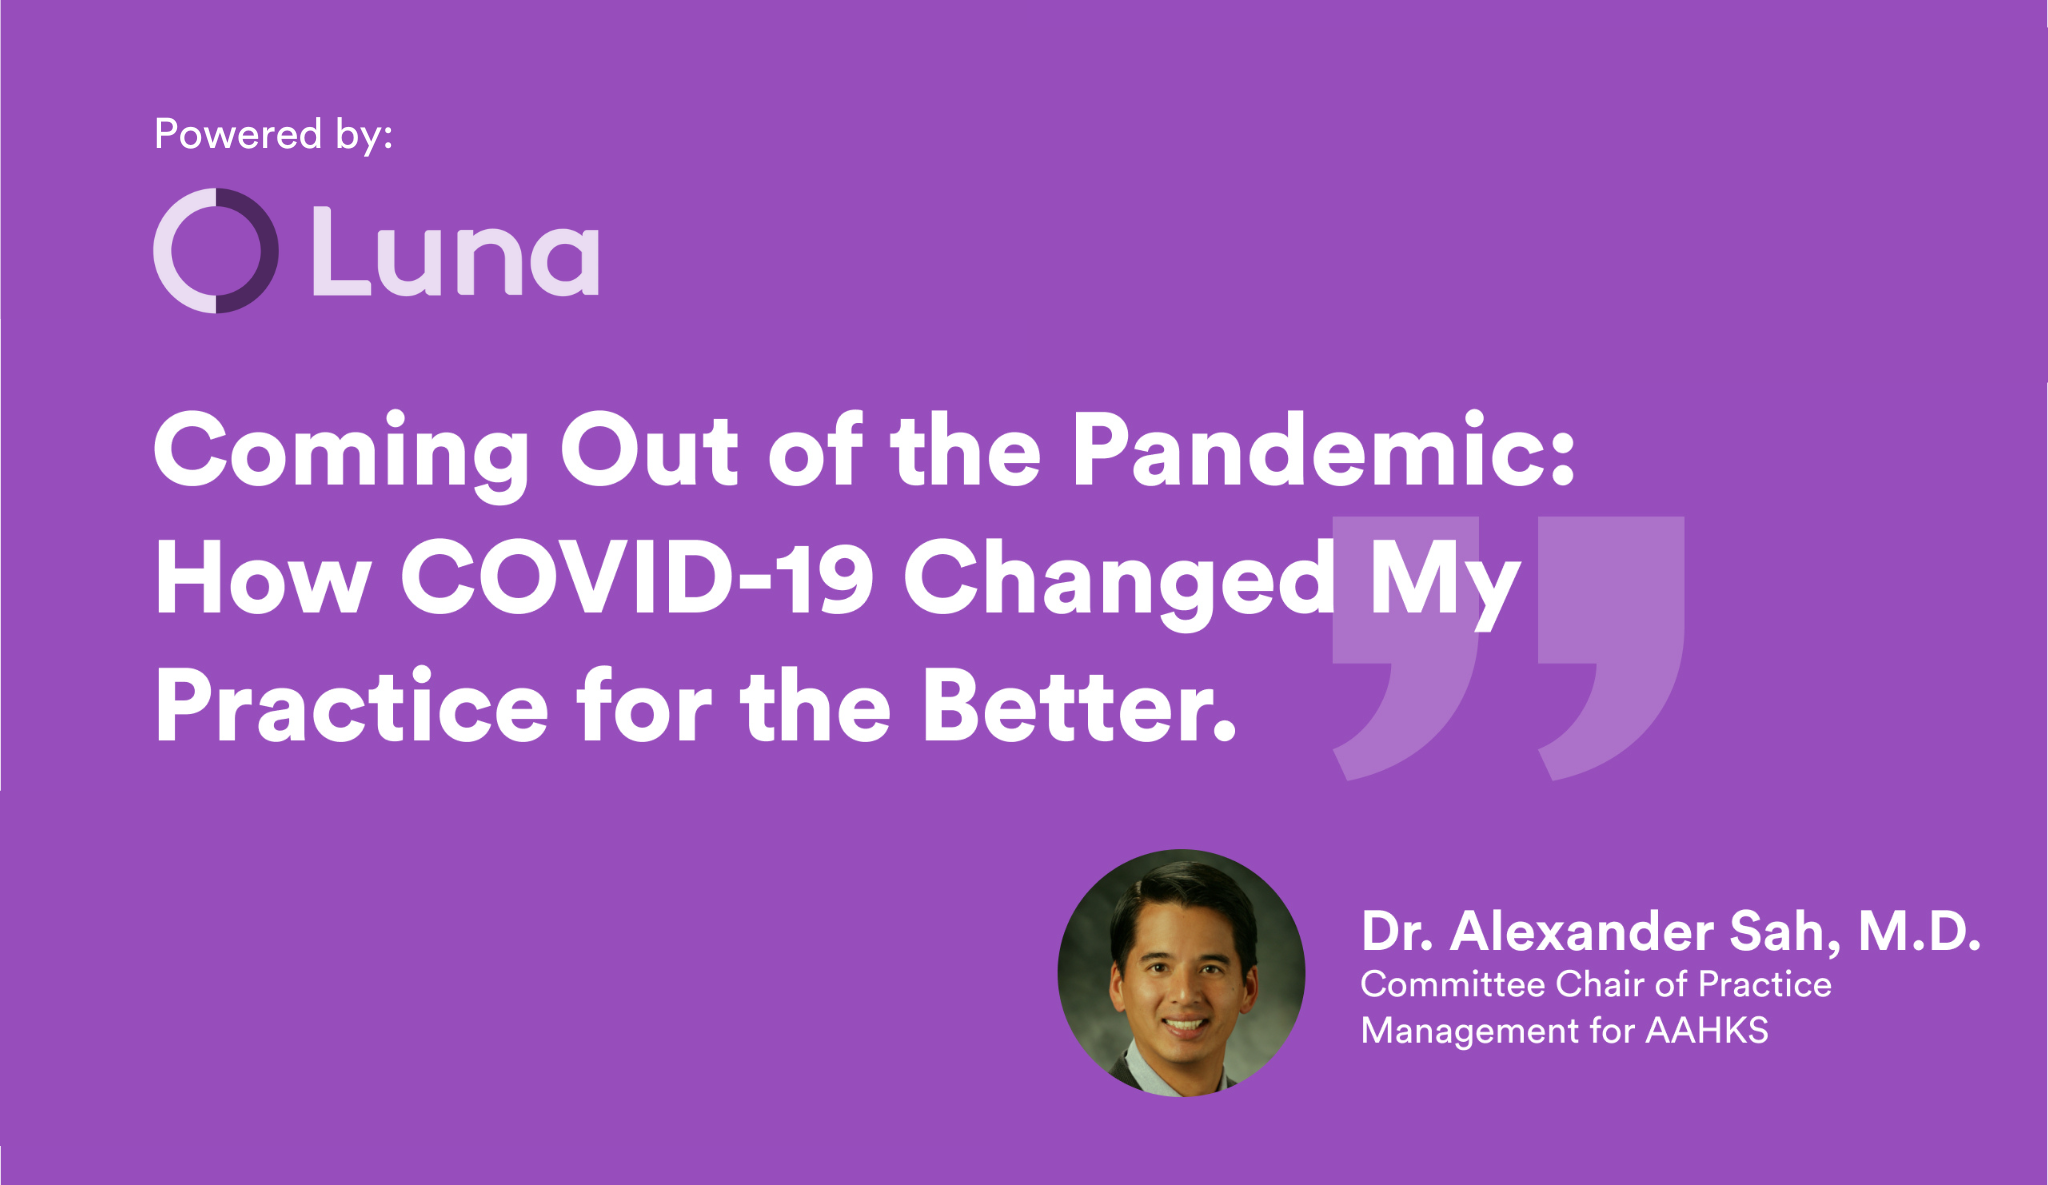 Webinar Recap: How COVID-19 Changed Dr. Sah's Practice for the Better